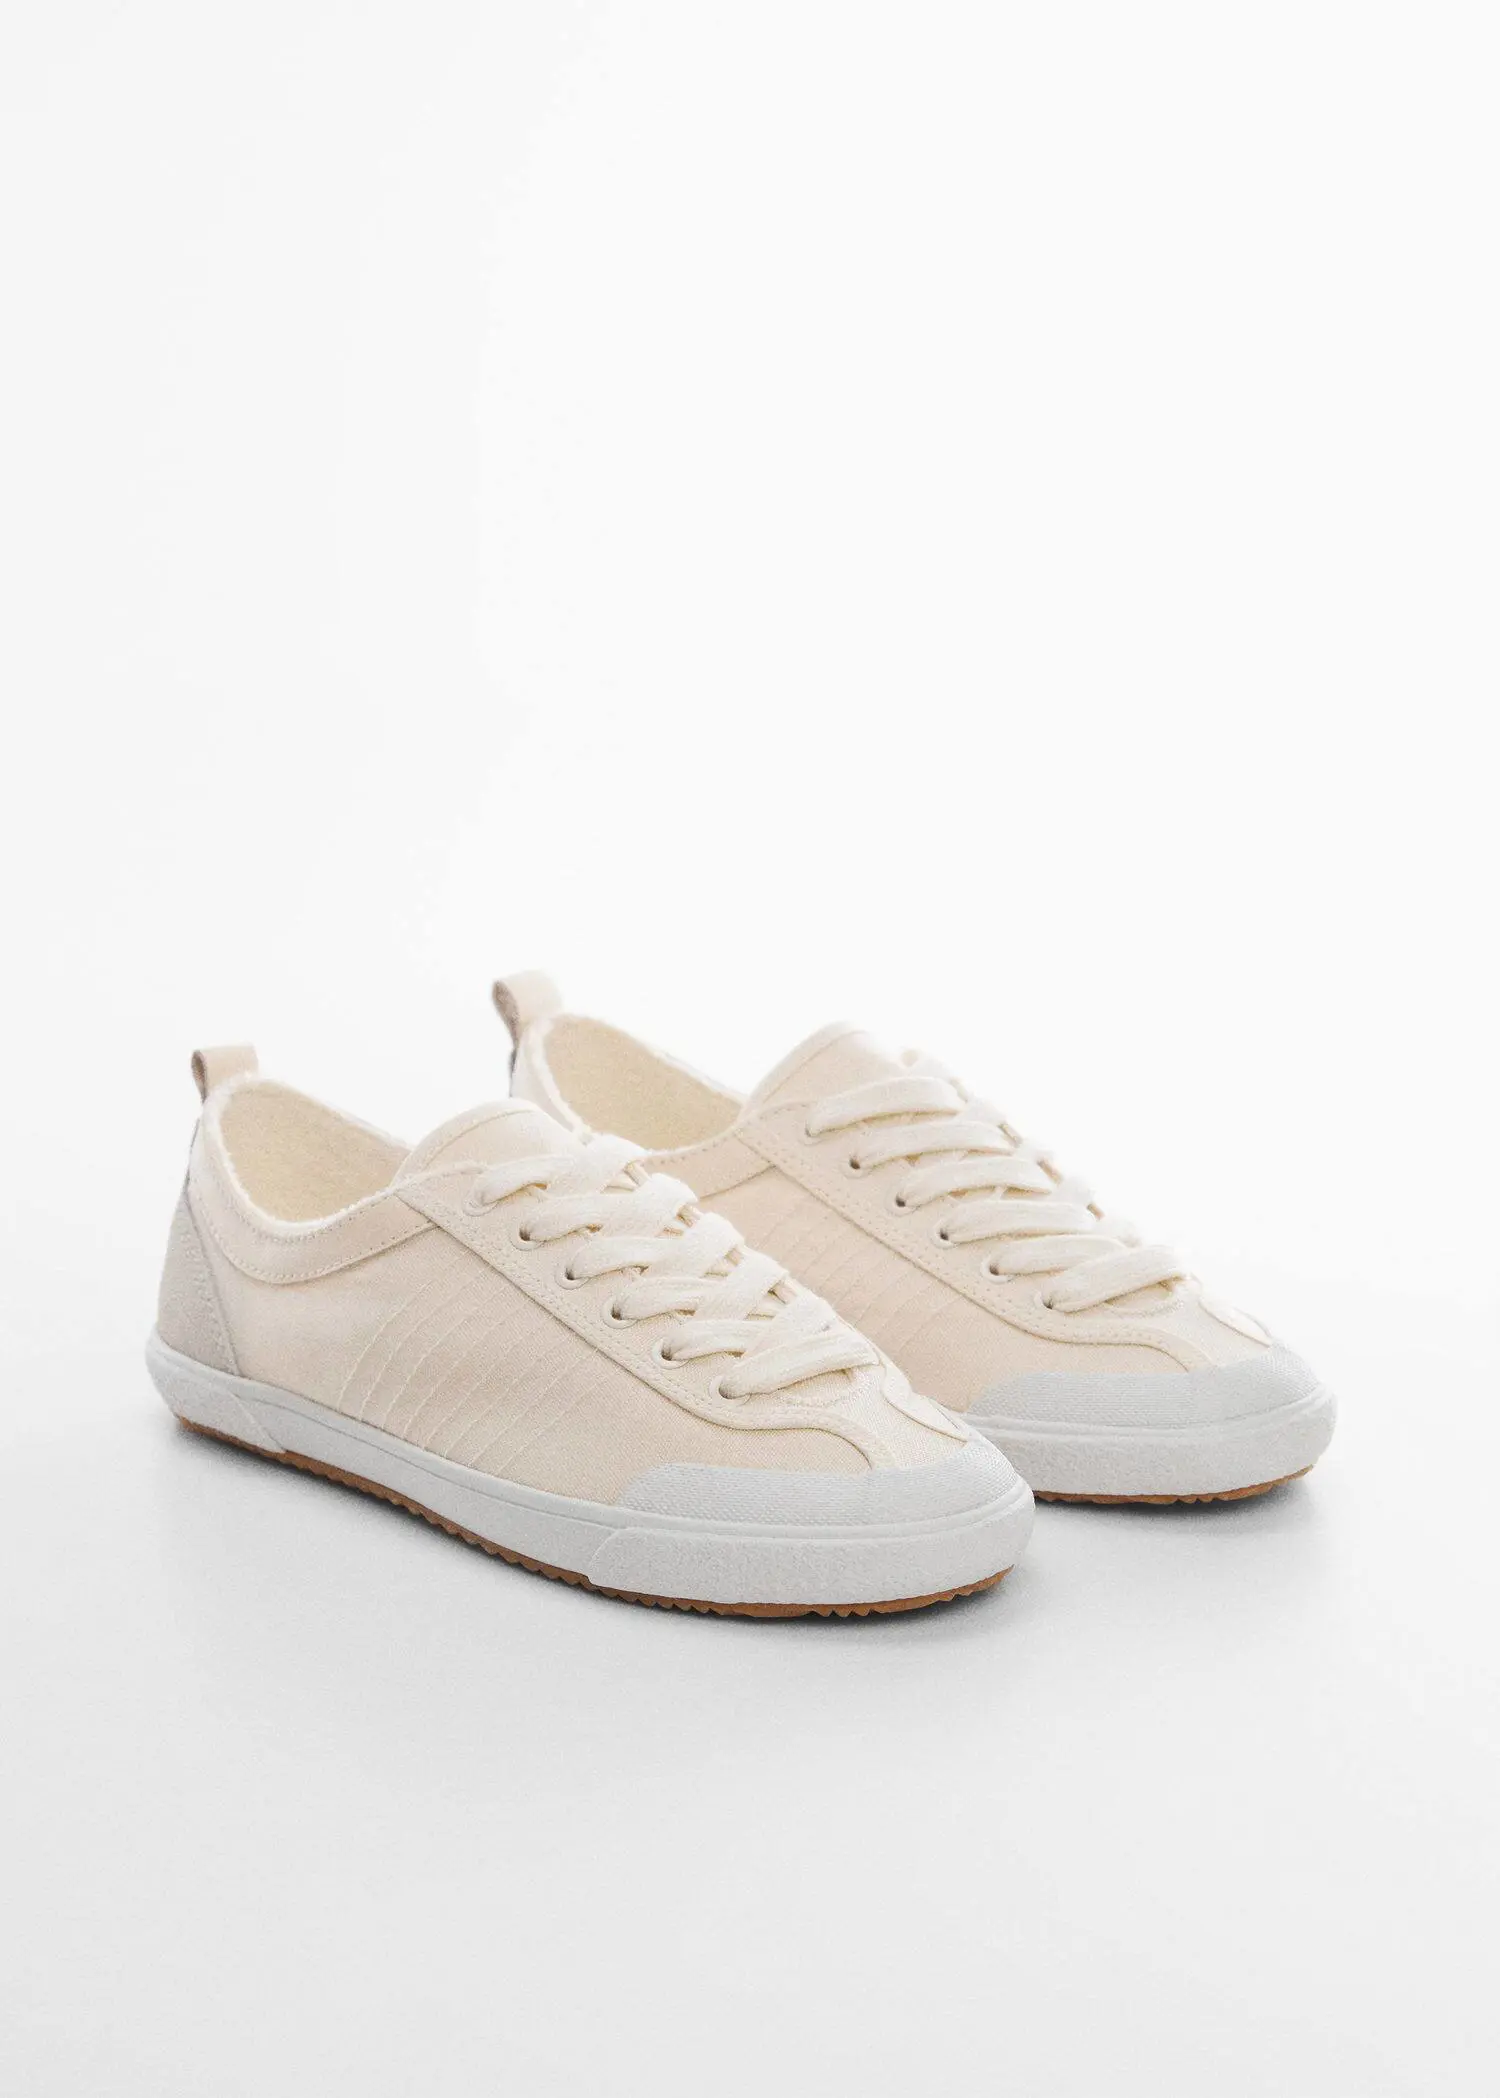 Mango Decorative seam sneakers. a pair of white sneakers on a white surface. 